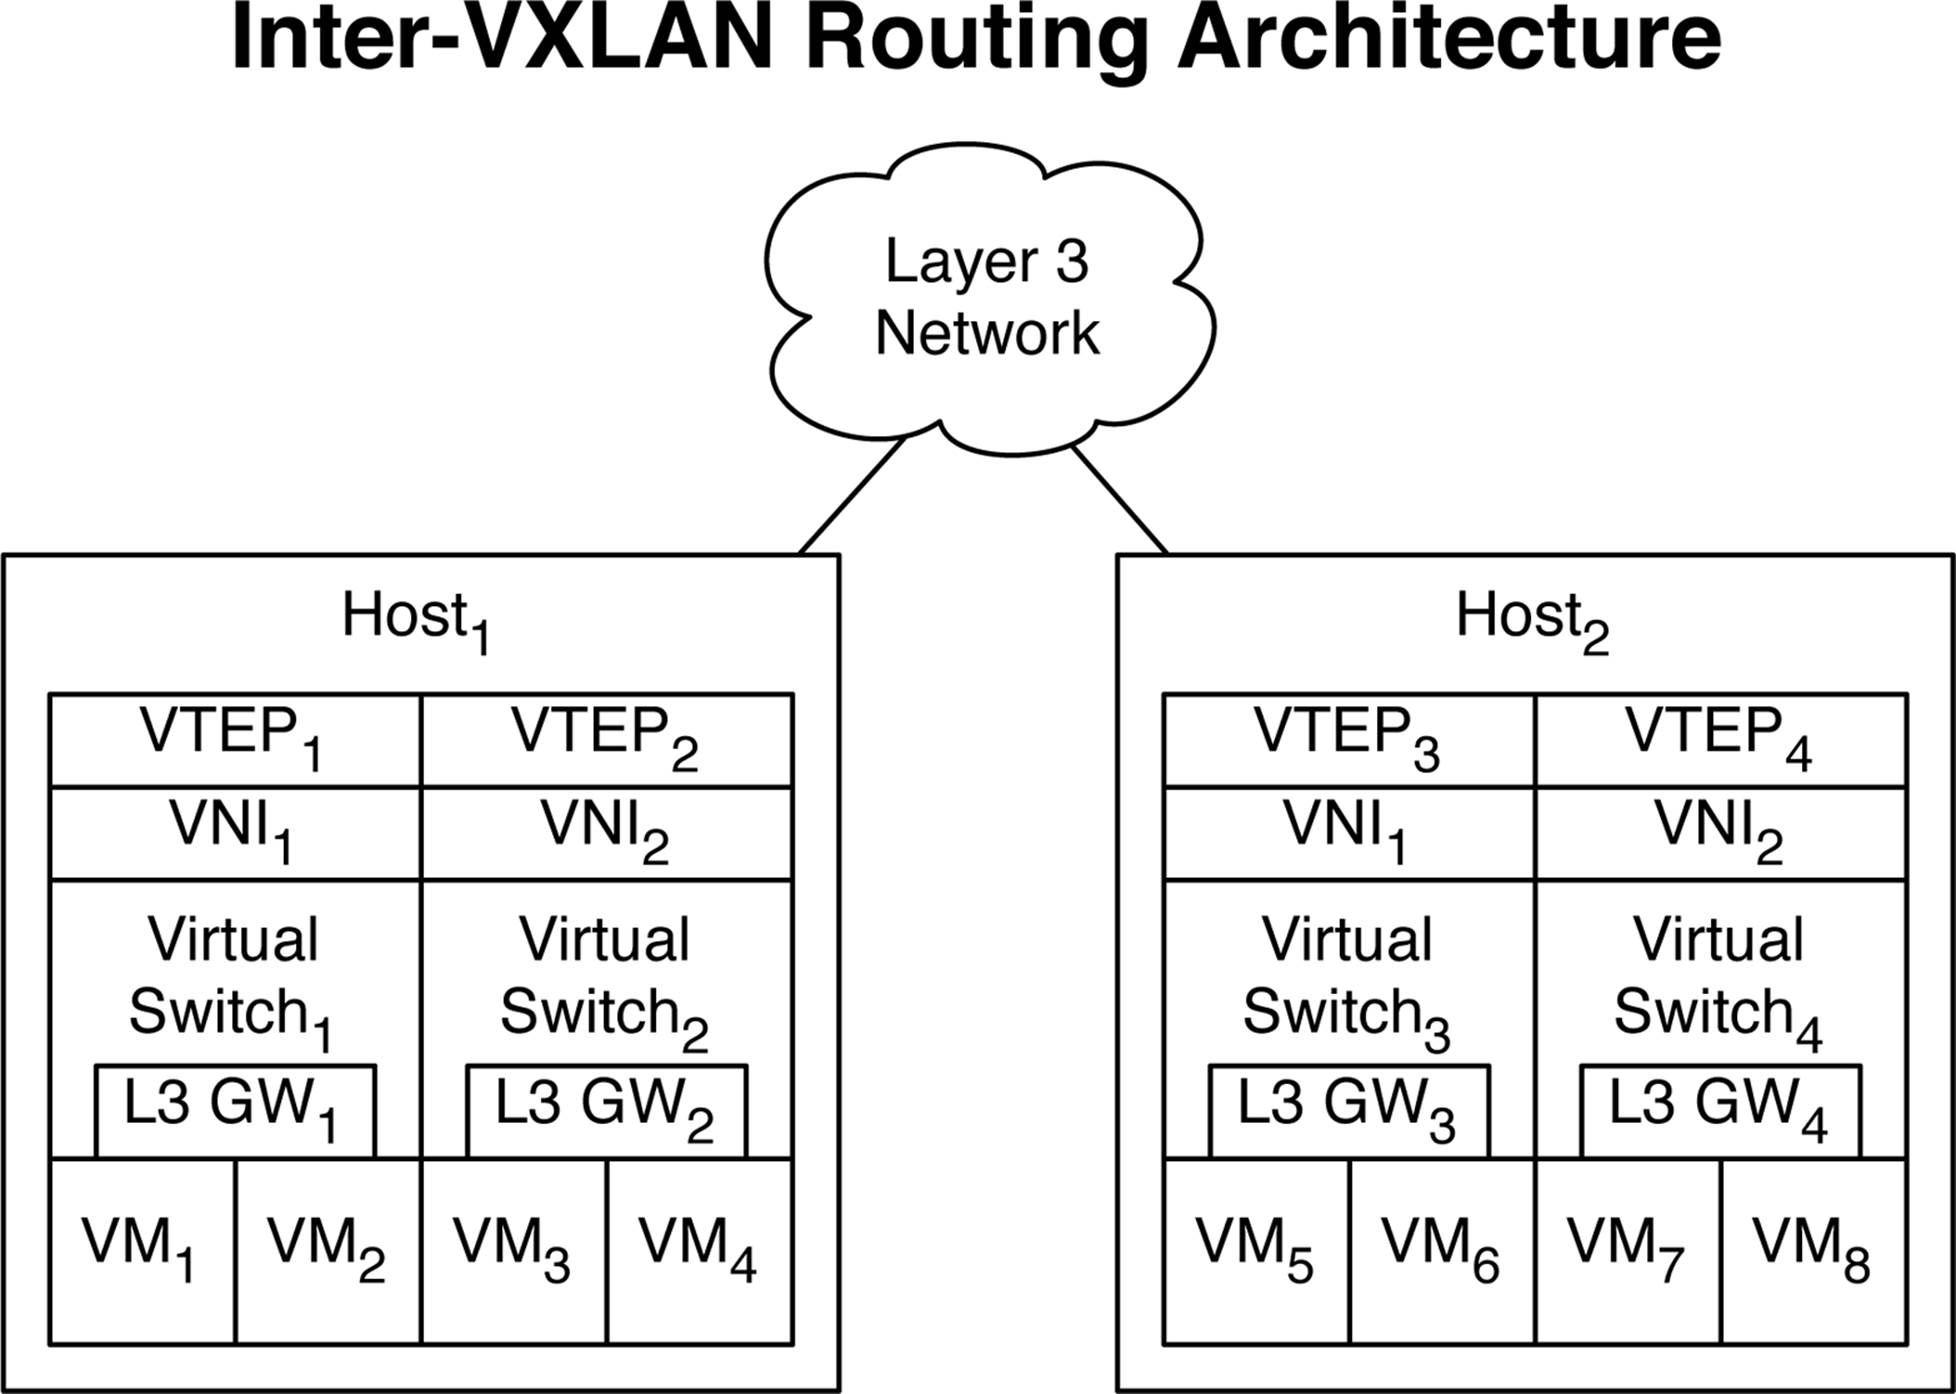 Inter-VXLAN routing architecture